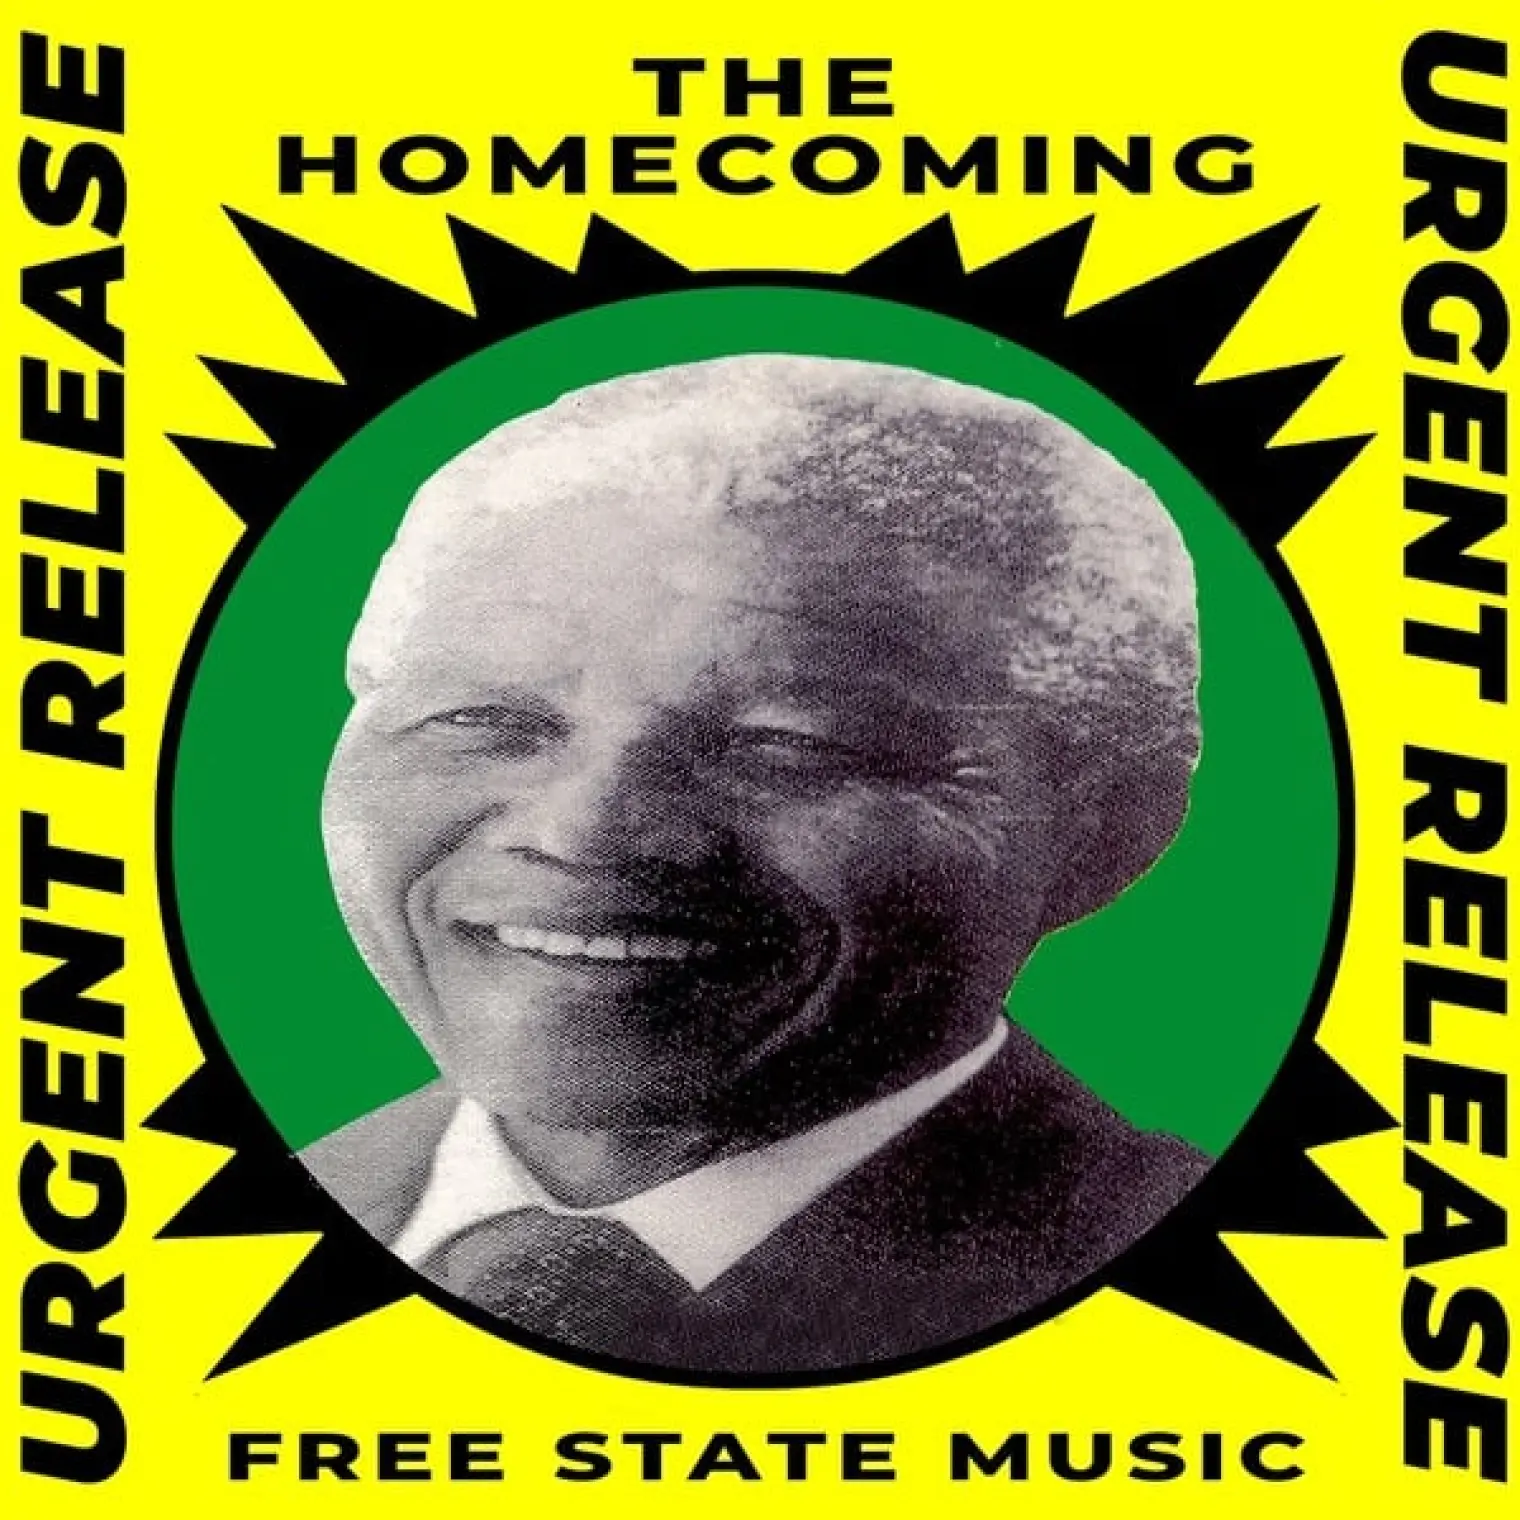 The Homecoming / Urgent Release -  Free State Music 